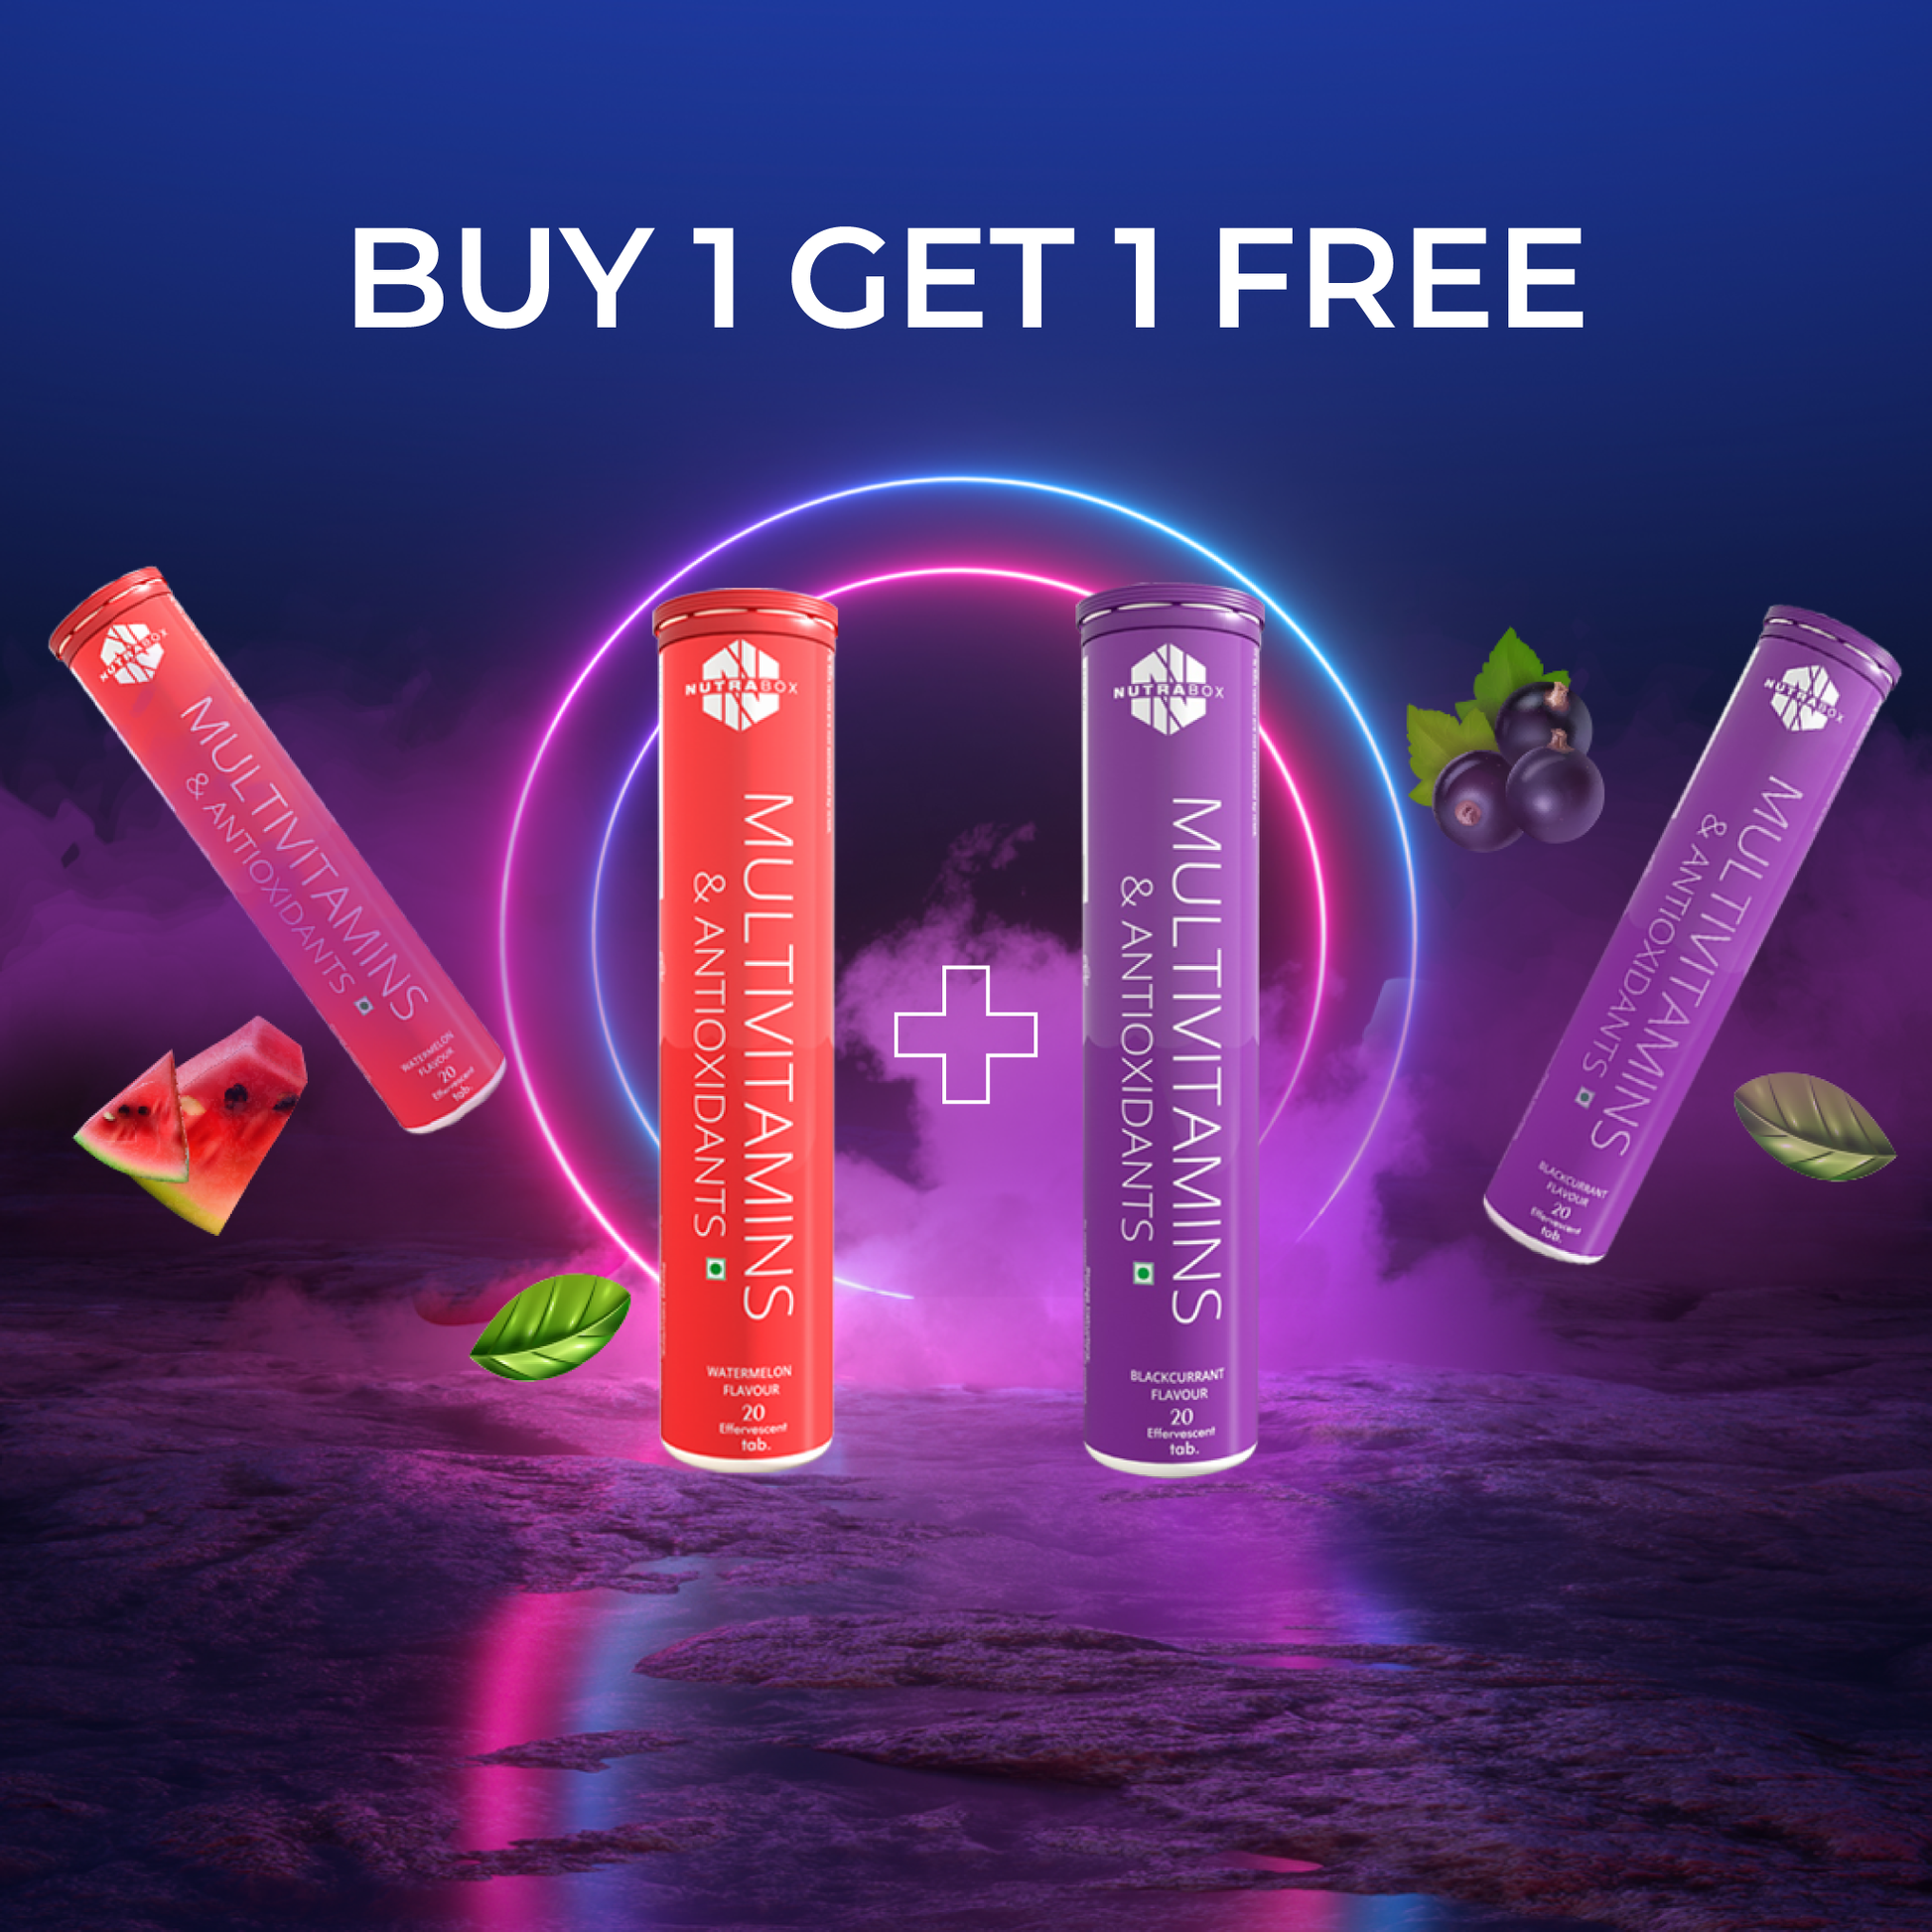 Daily Multivitamins & Anti-Oxidants Effervescent tablets - Buy 1 tube get 1 tube free - Nutrabox India